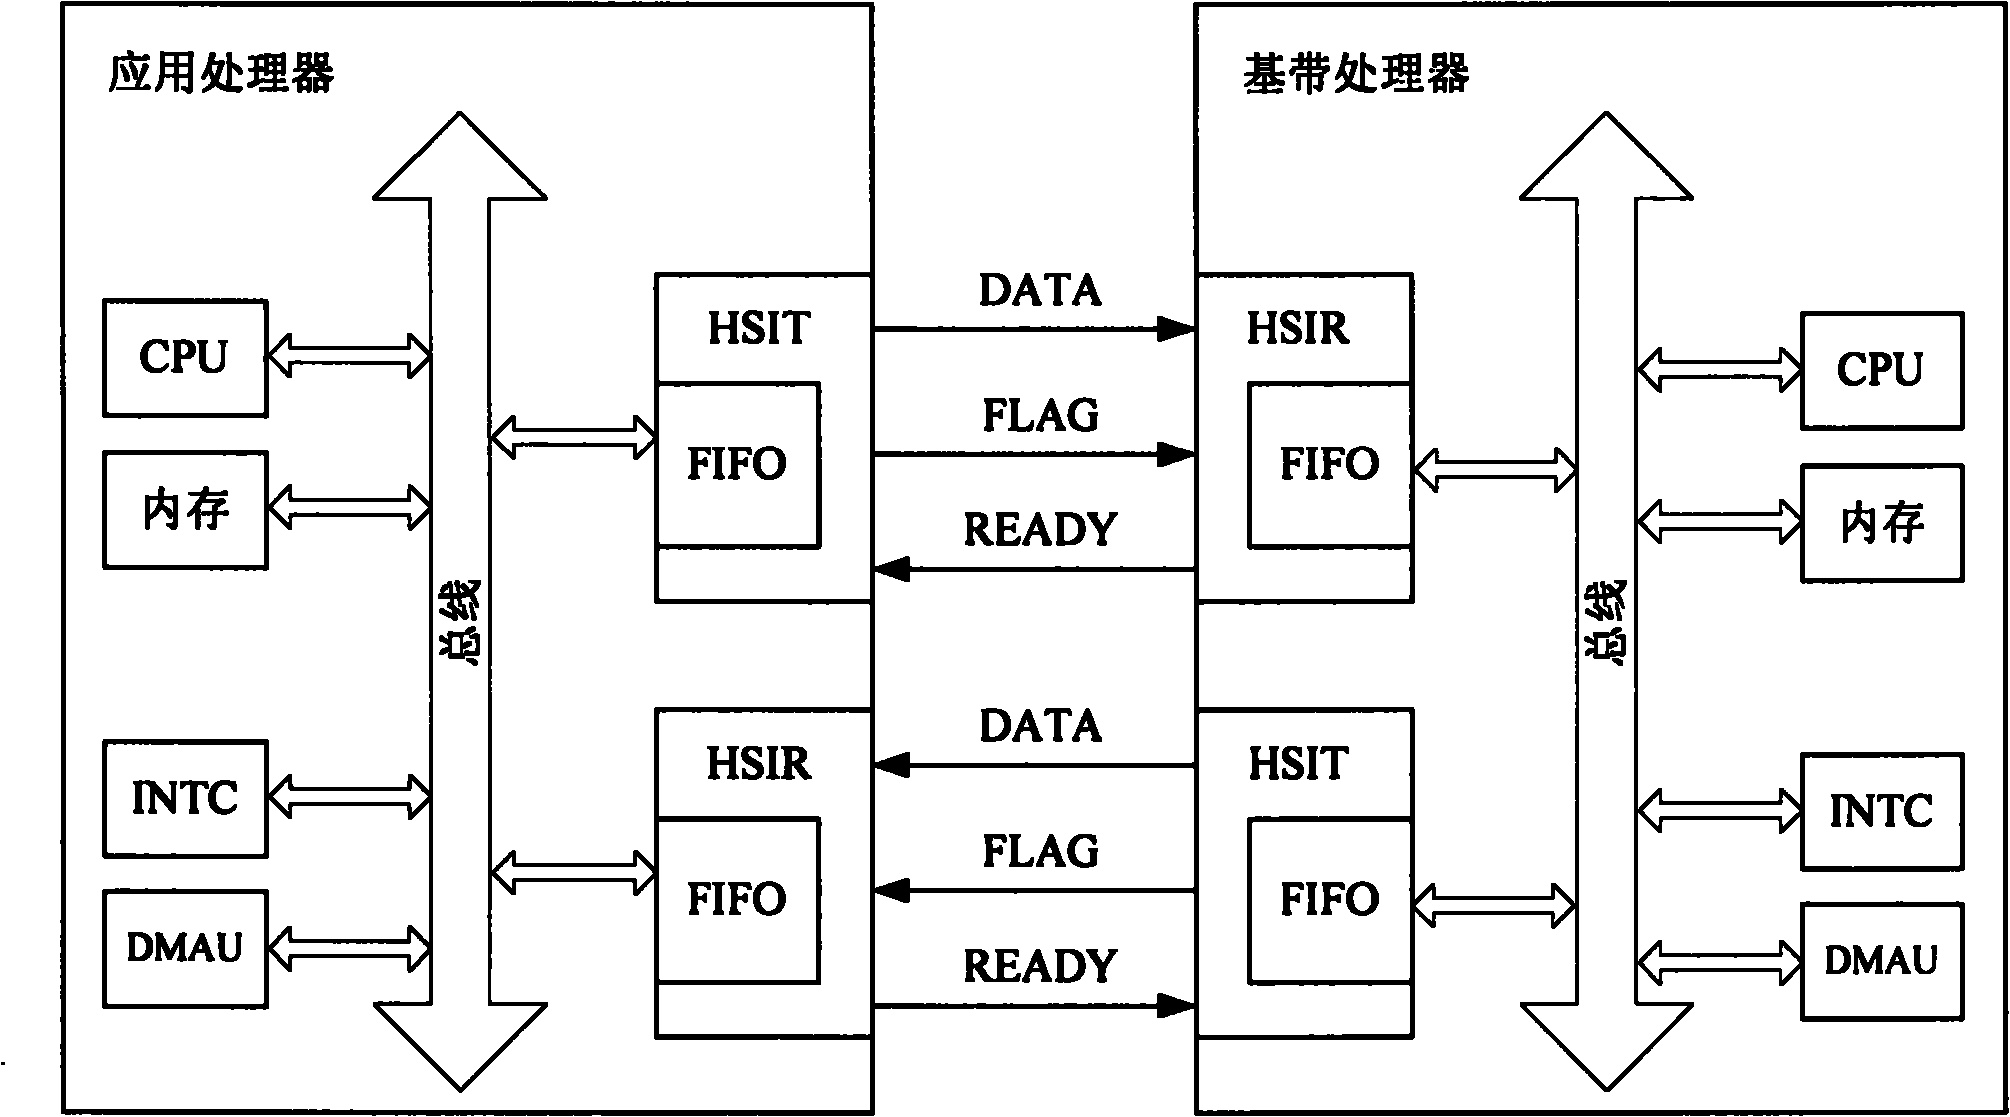 Method for realizing communication between smart mobile phone chips and smart mobile phone